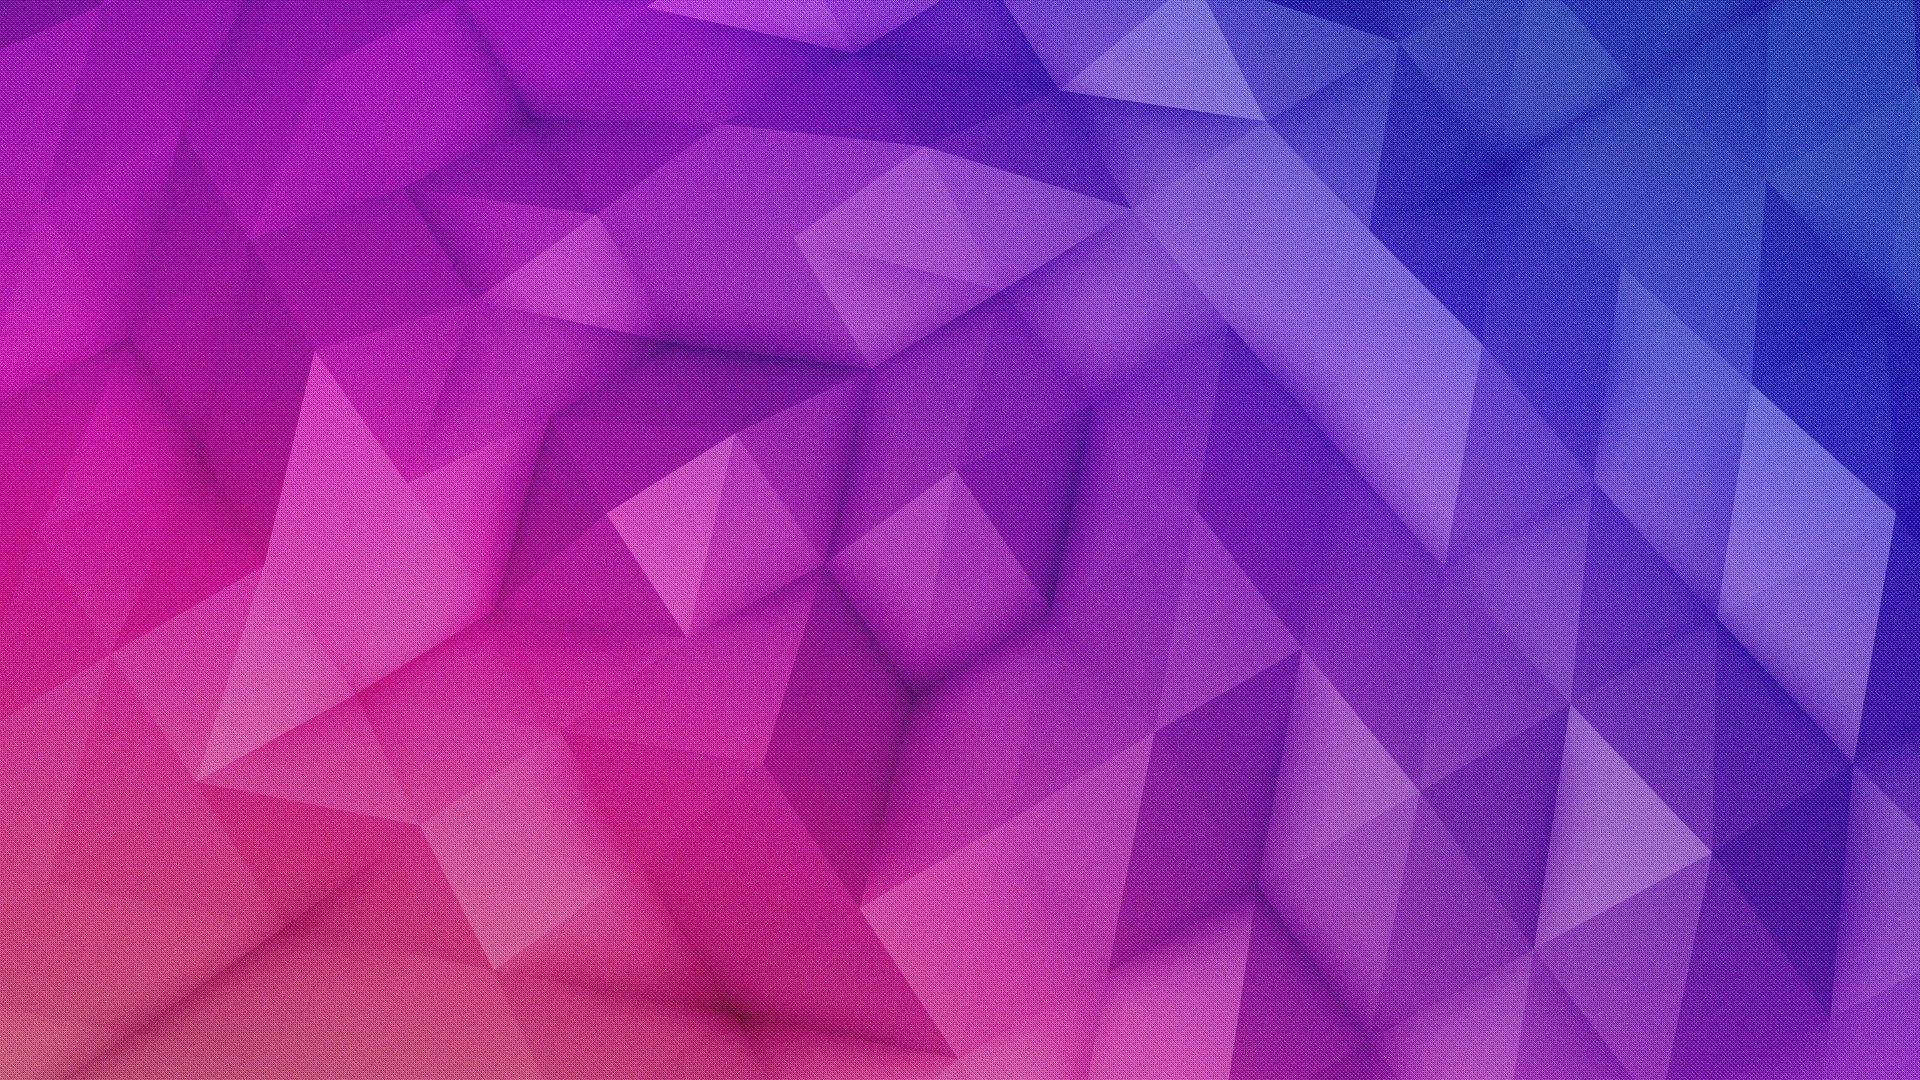 Colorful pyramid grid wallpaper and background